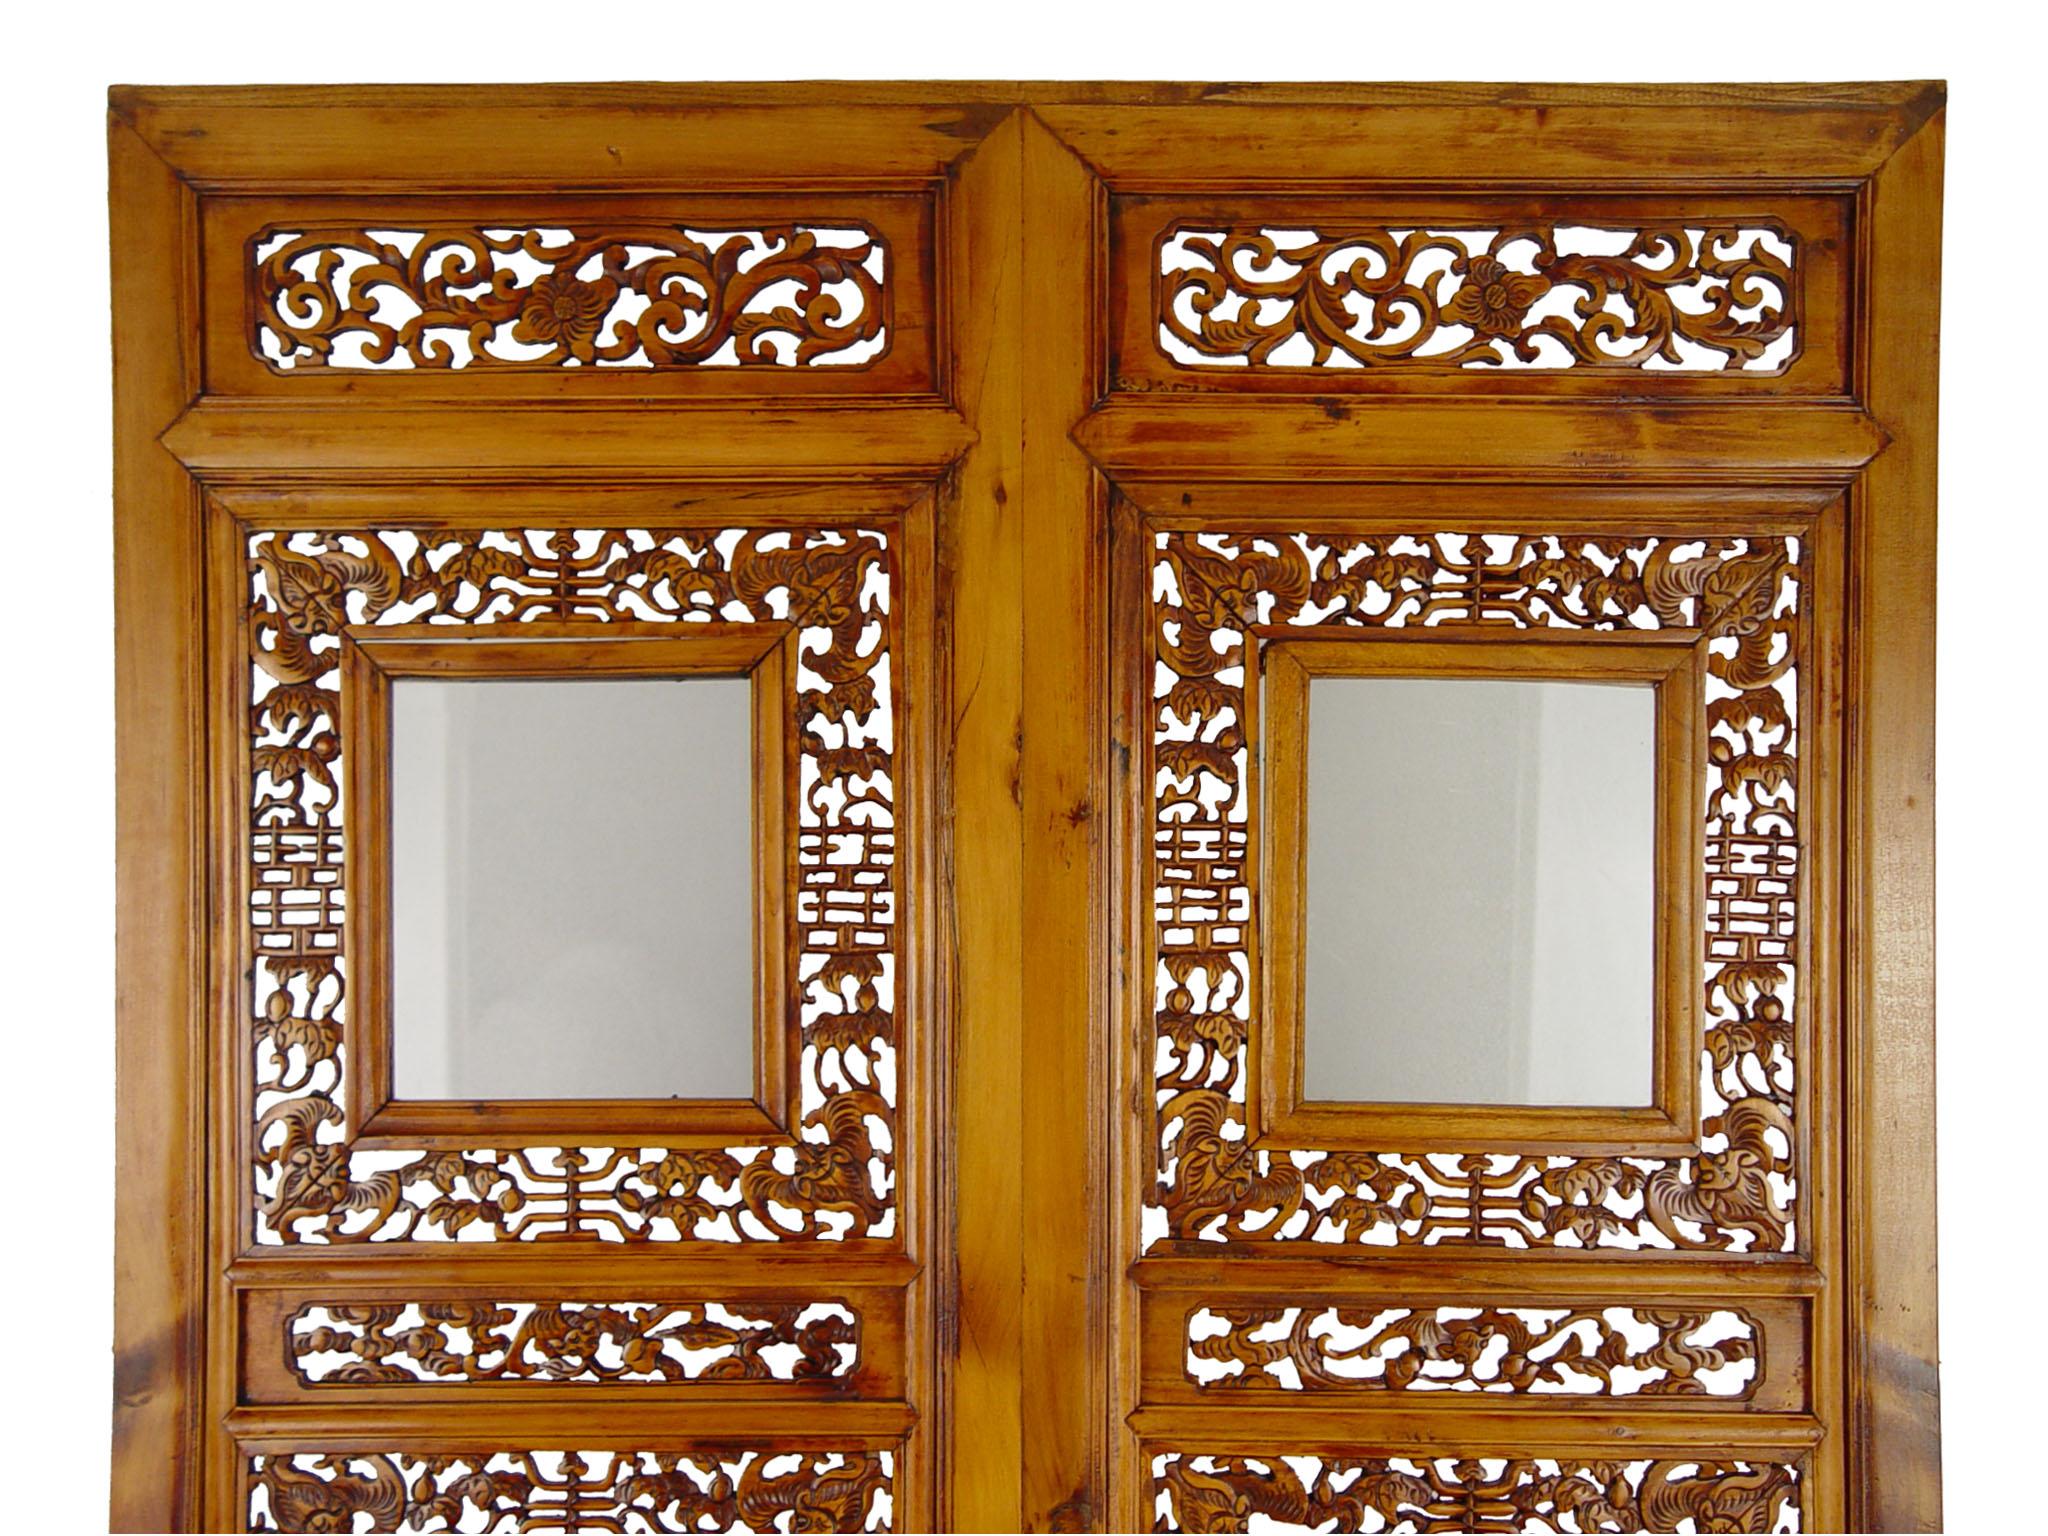 Chinese Export Early 20th Century Chinese Antique Open Carved Screen / Room Divider For Sale